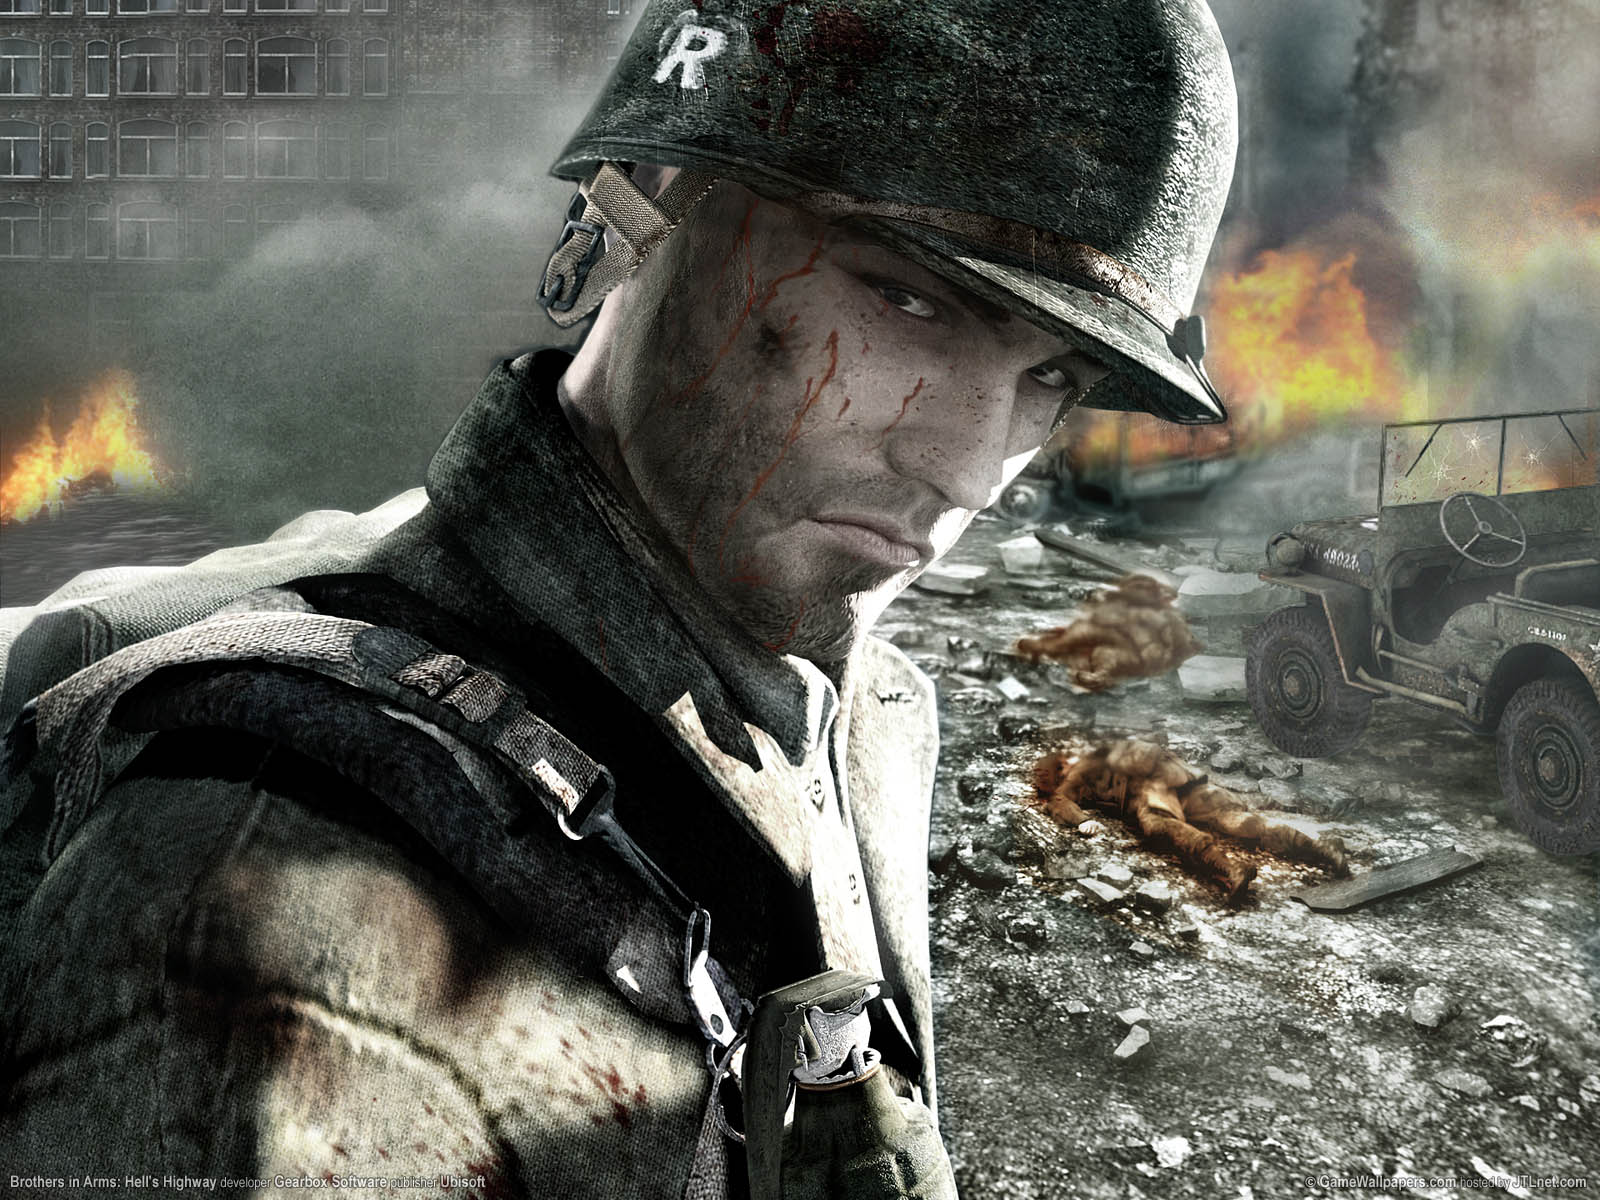 Brothers in Arms: Hell's Highway achtergrond 01 1600x1200